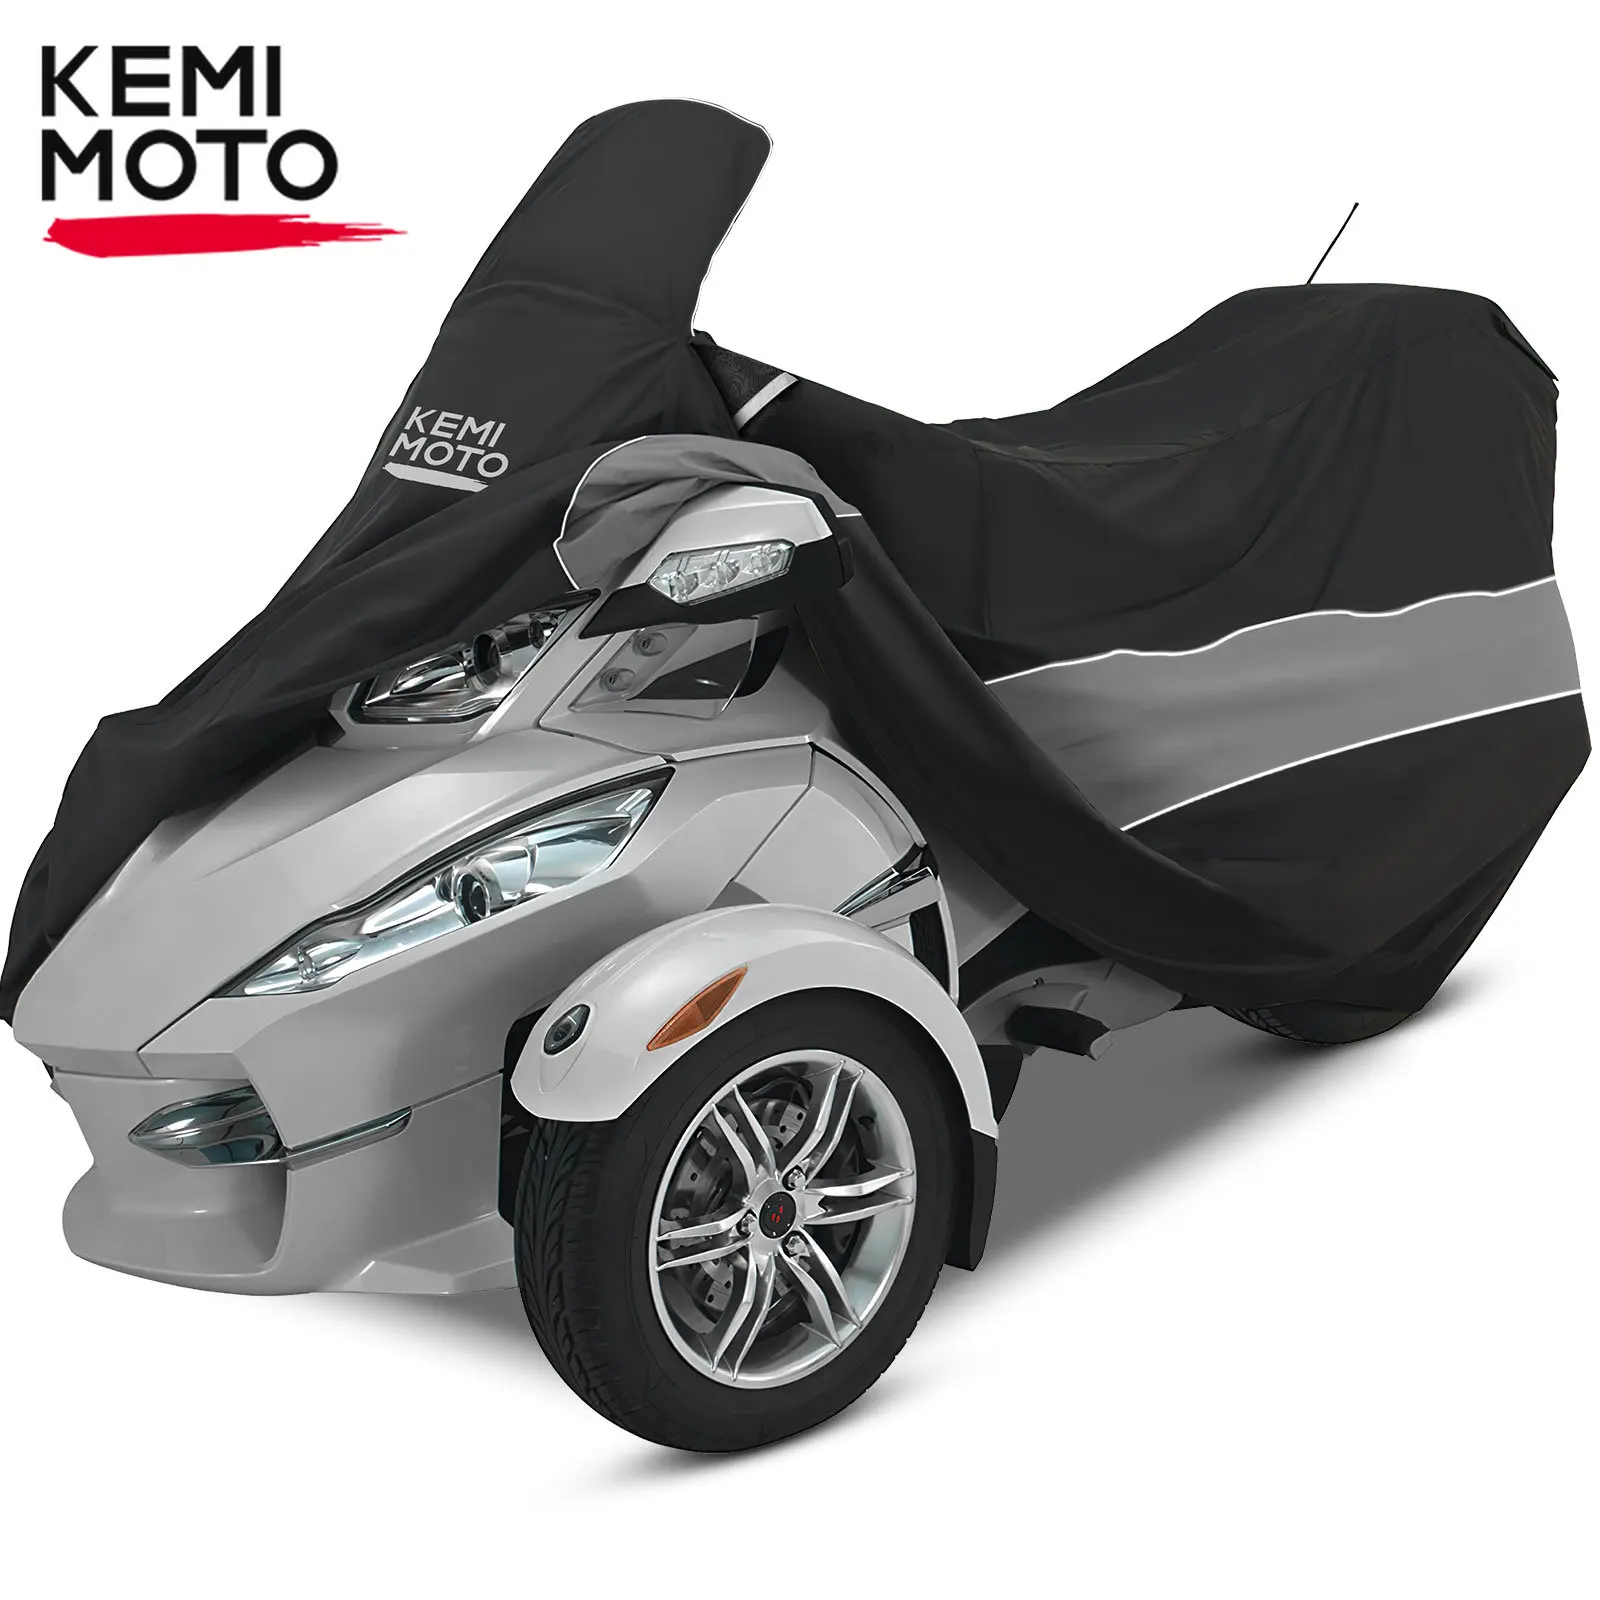 

KEMIMOTO Dark Gery Full Cover for Can-Am Spyder RT RT-S Dustproof All Weather Resistant with Reflective Strips Breathable Hole